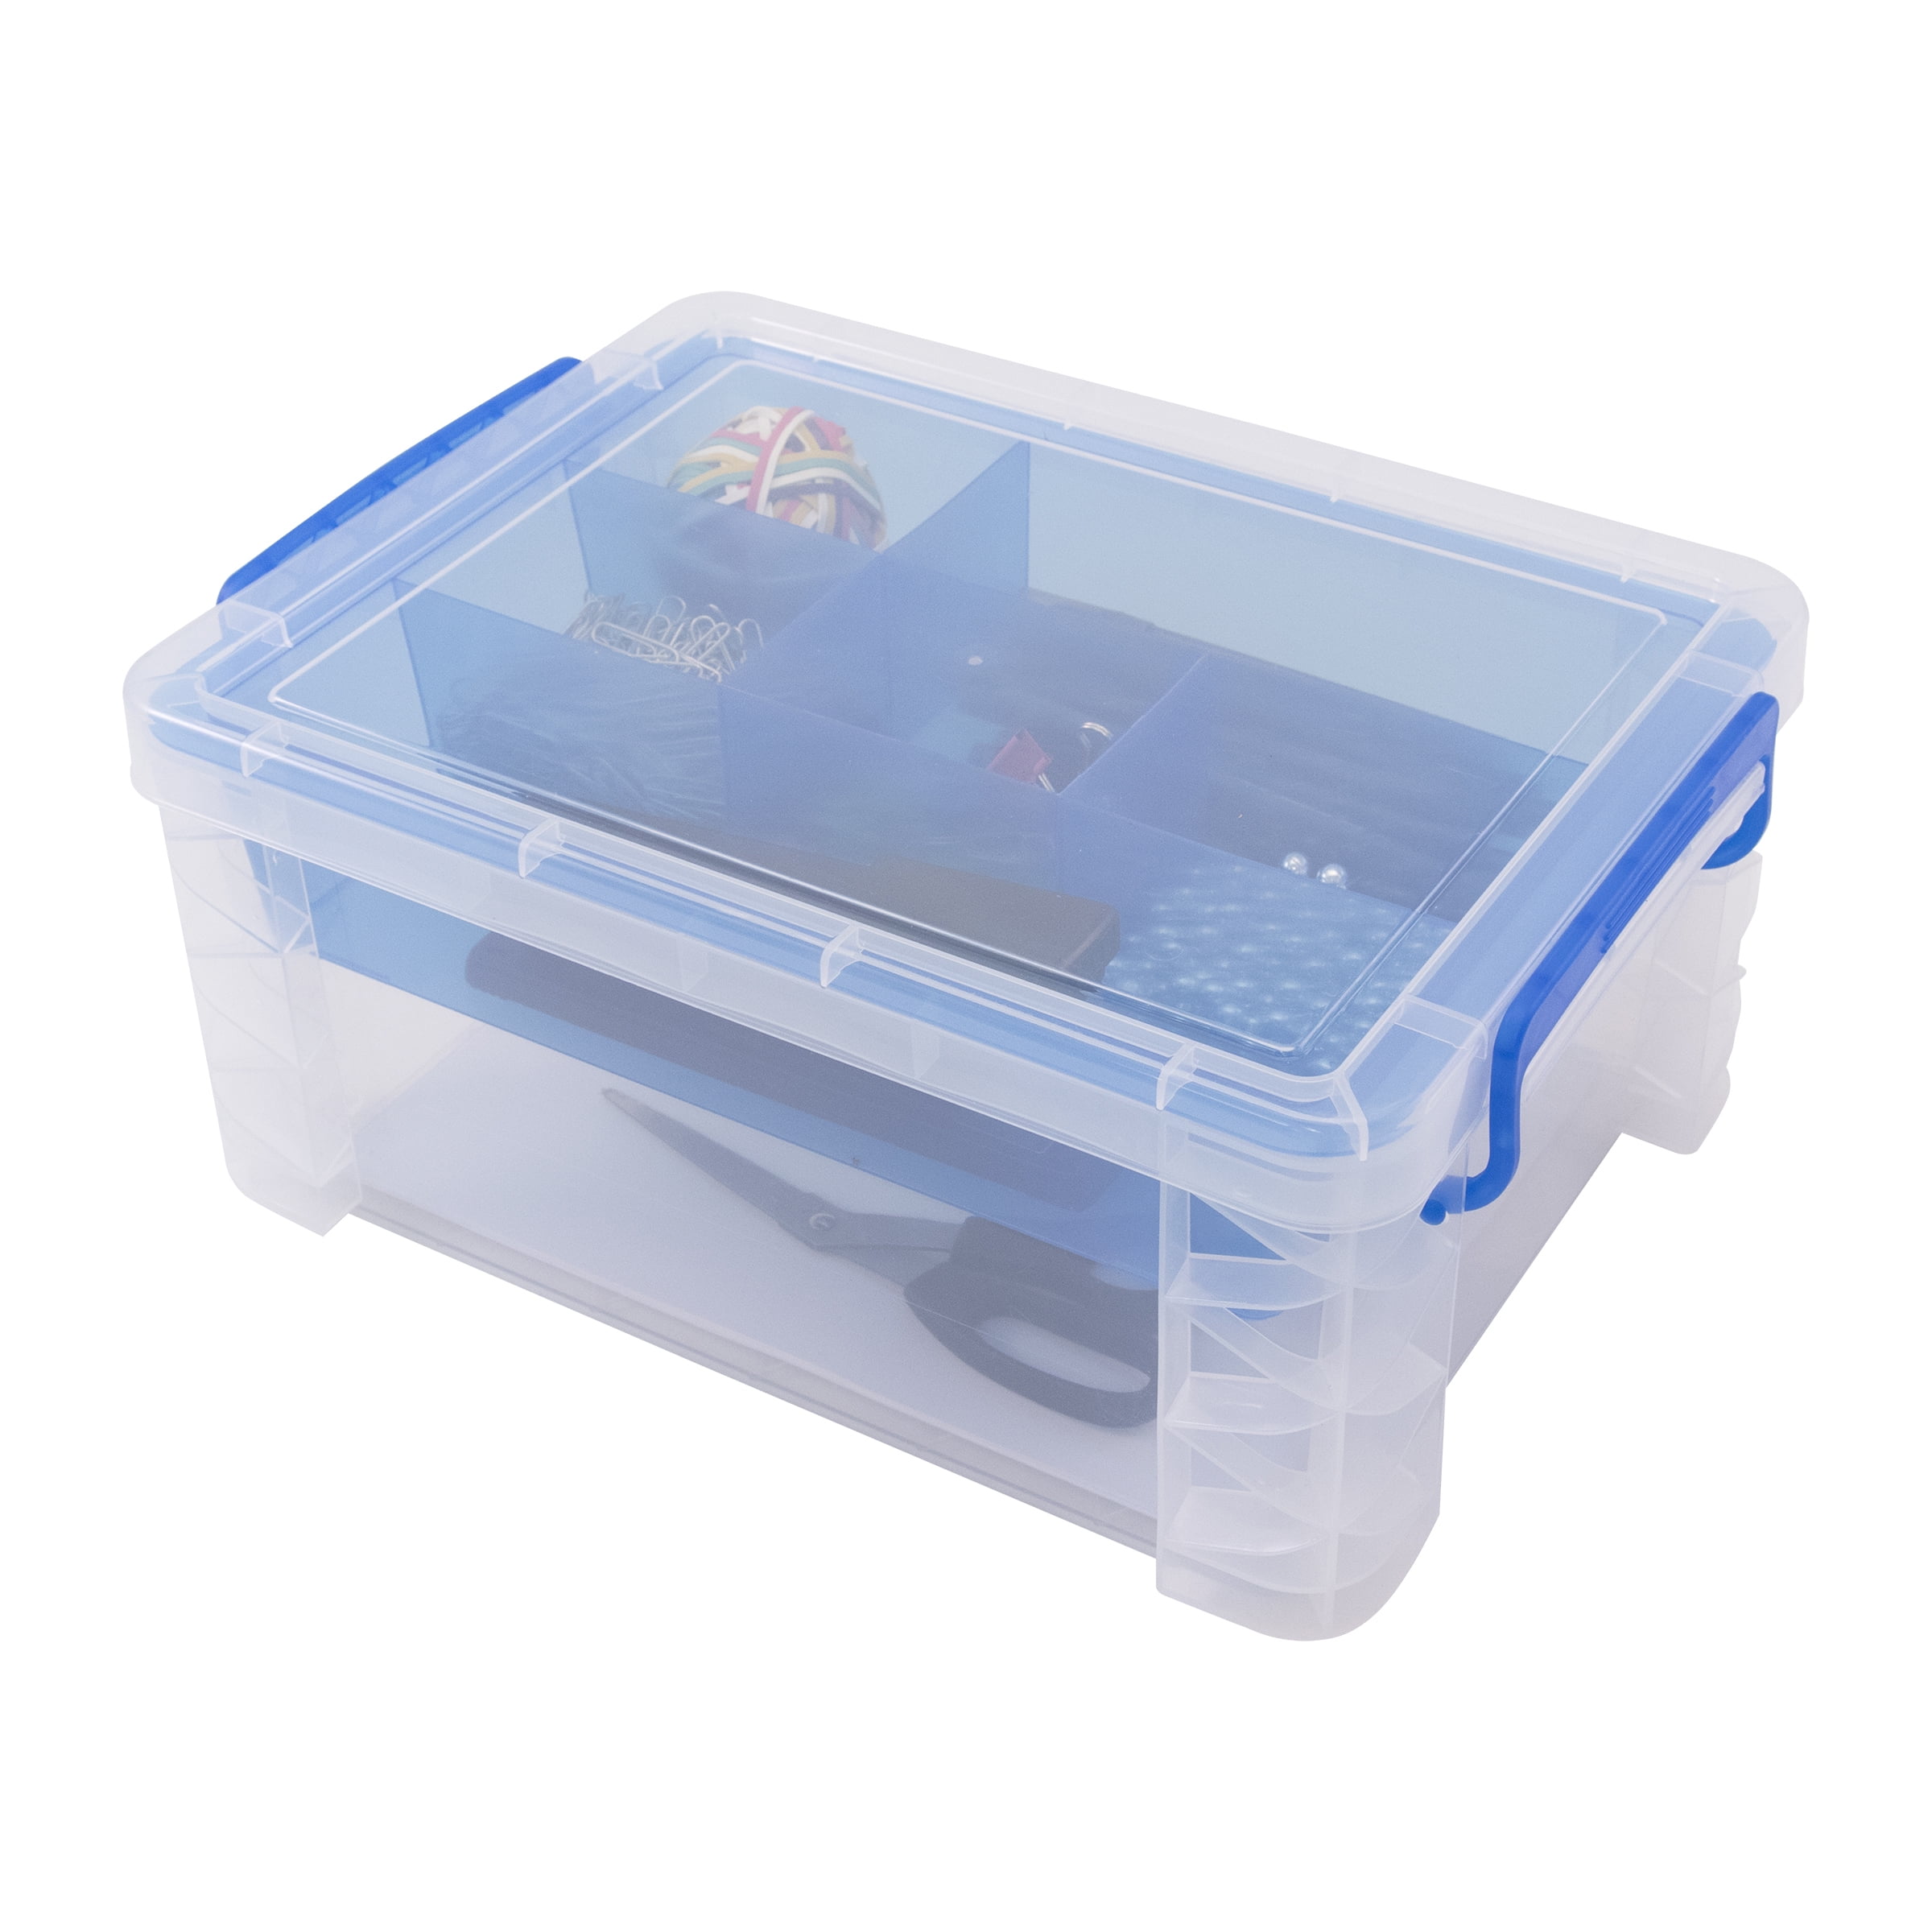 Divided Storage Box With Clips Lid (3500 ml)